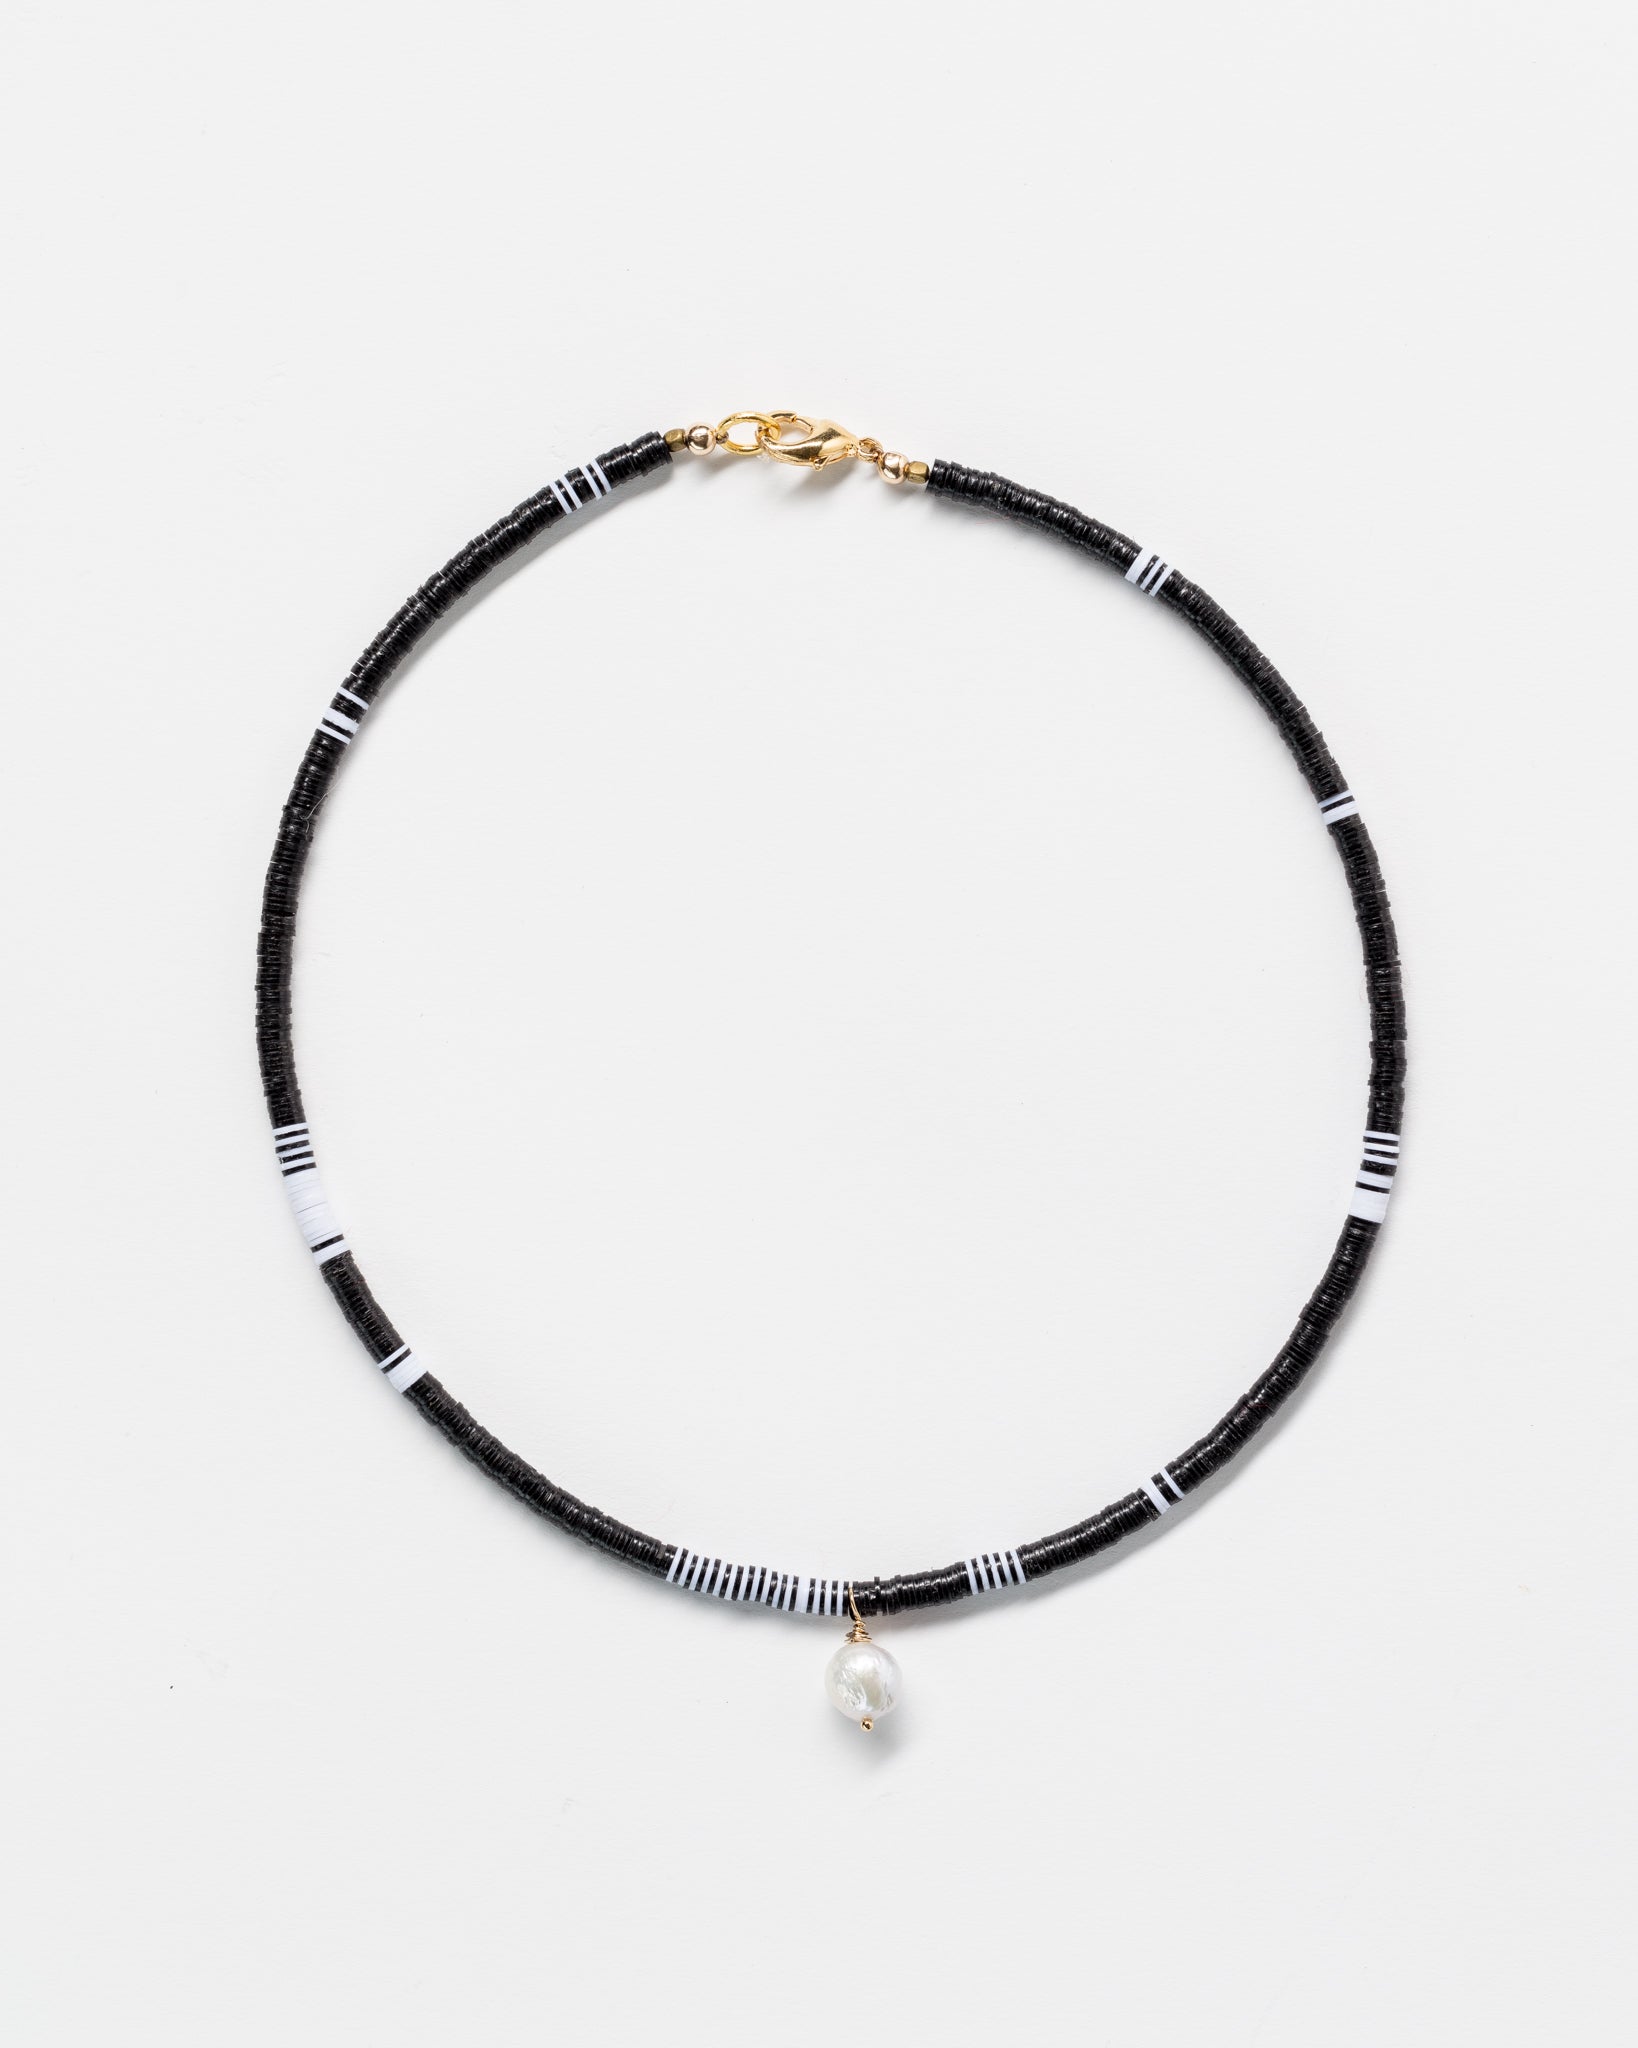 A Designs By Raya necklace with black and white beads and a single pearl, styled with gold clasps, displayed on a plain white background.